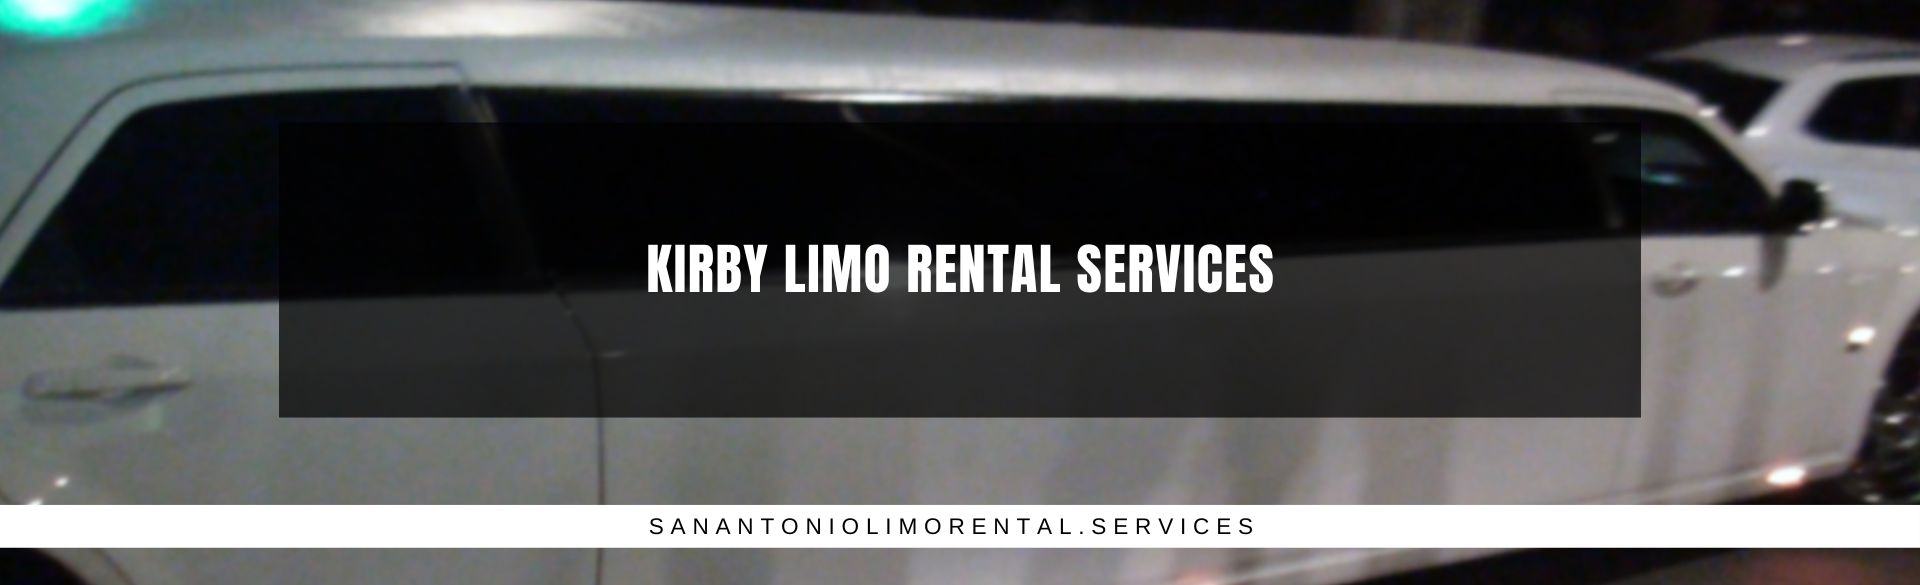 Kirby Limo Rental Services